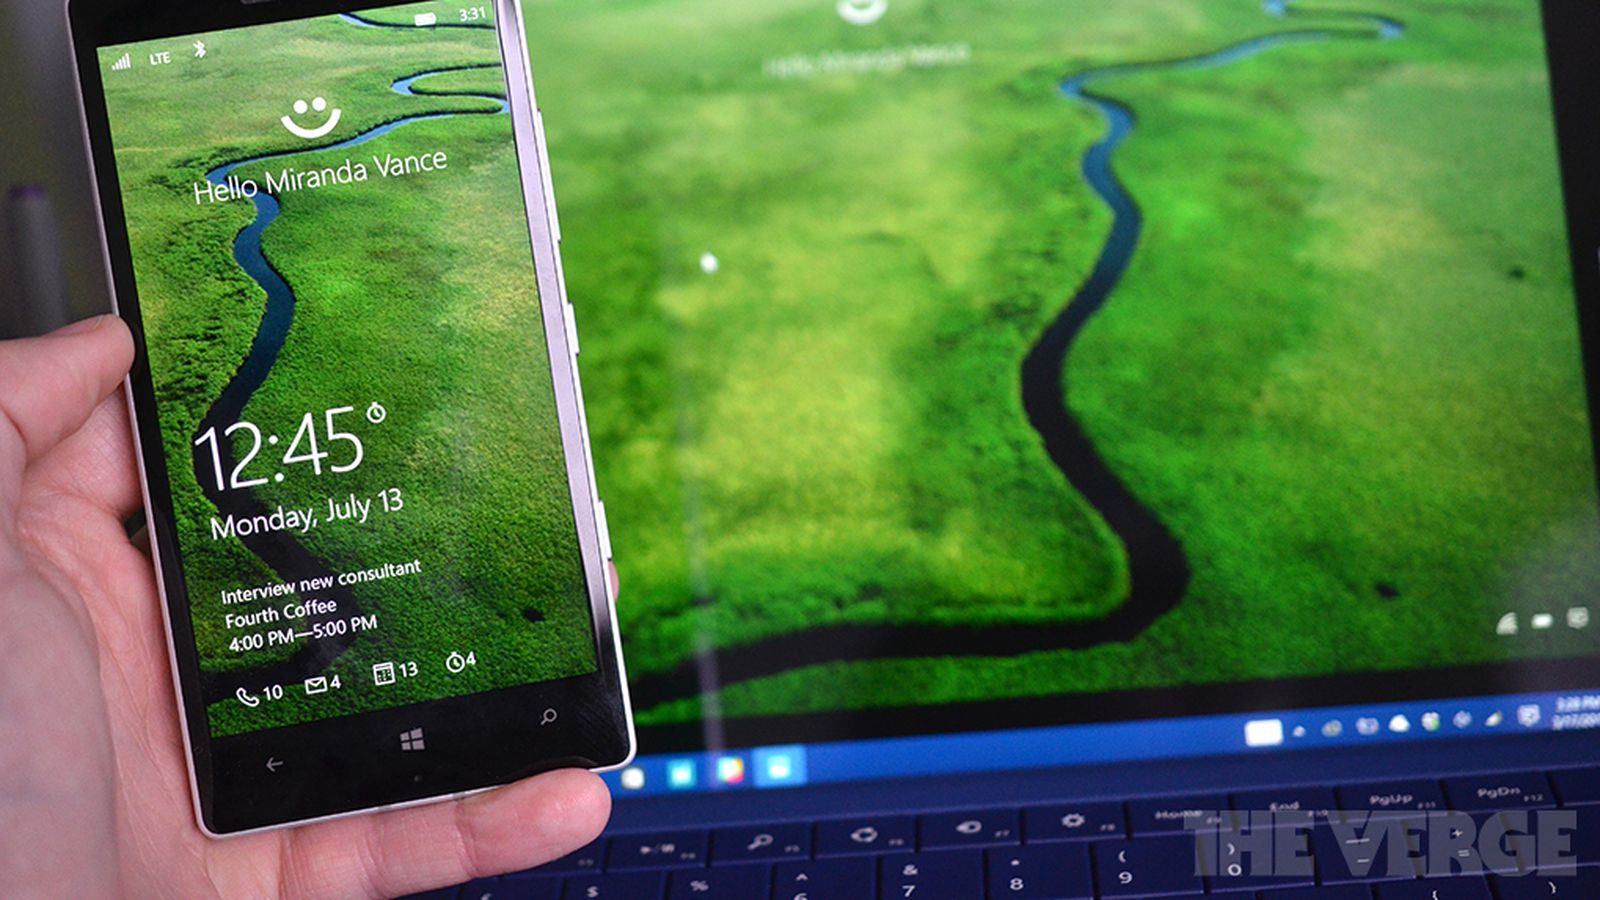 Windows Hello lets you sign into Windows 10 devices with your face or